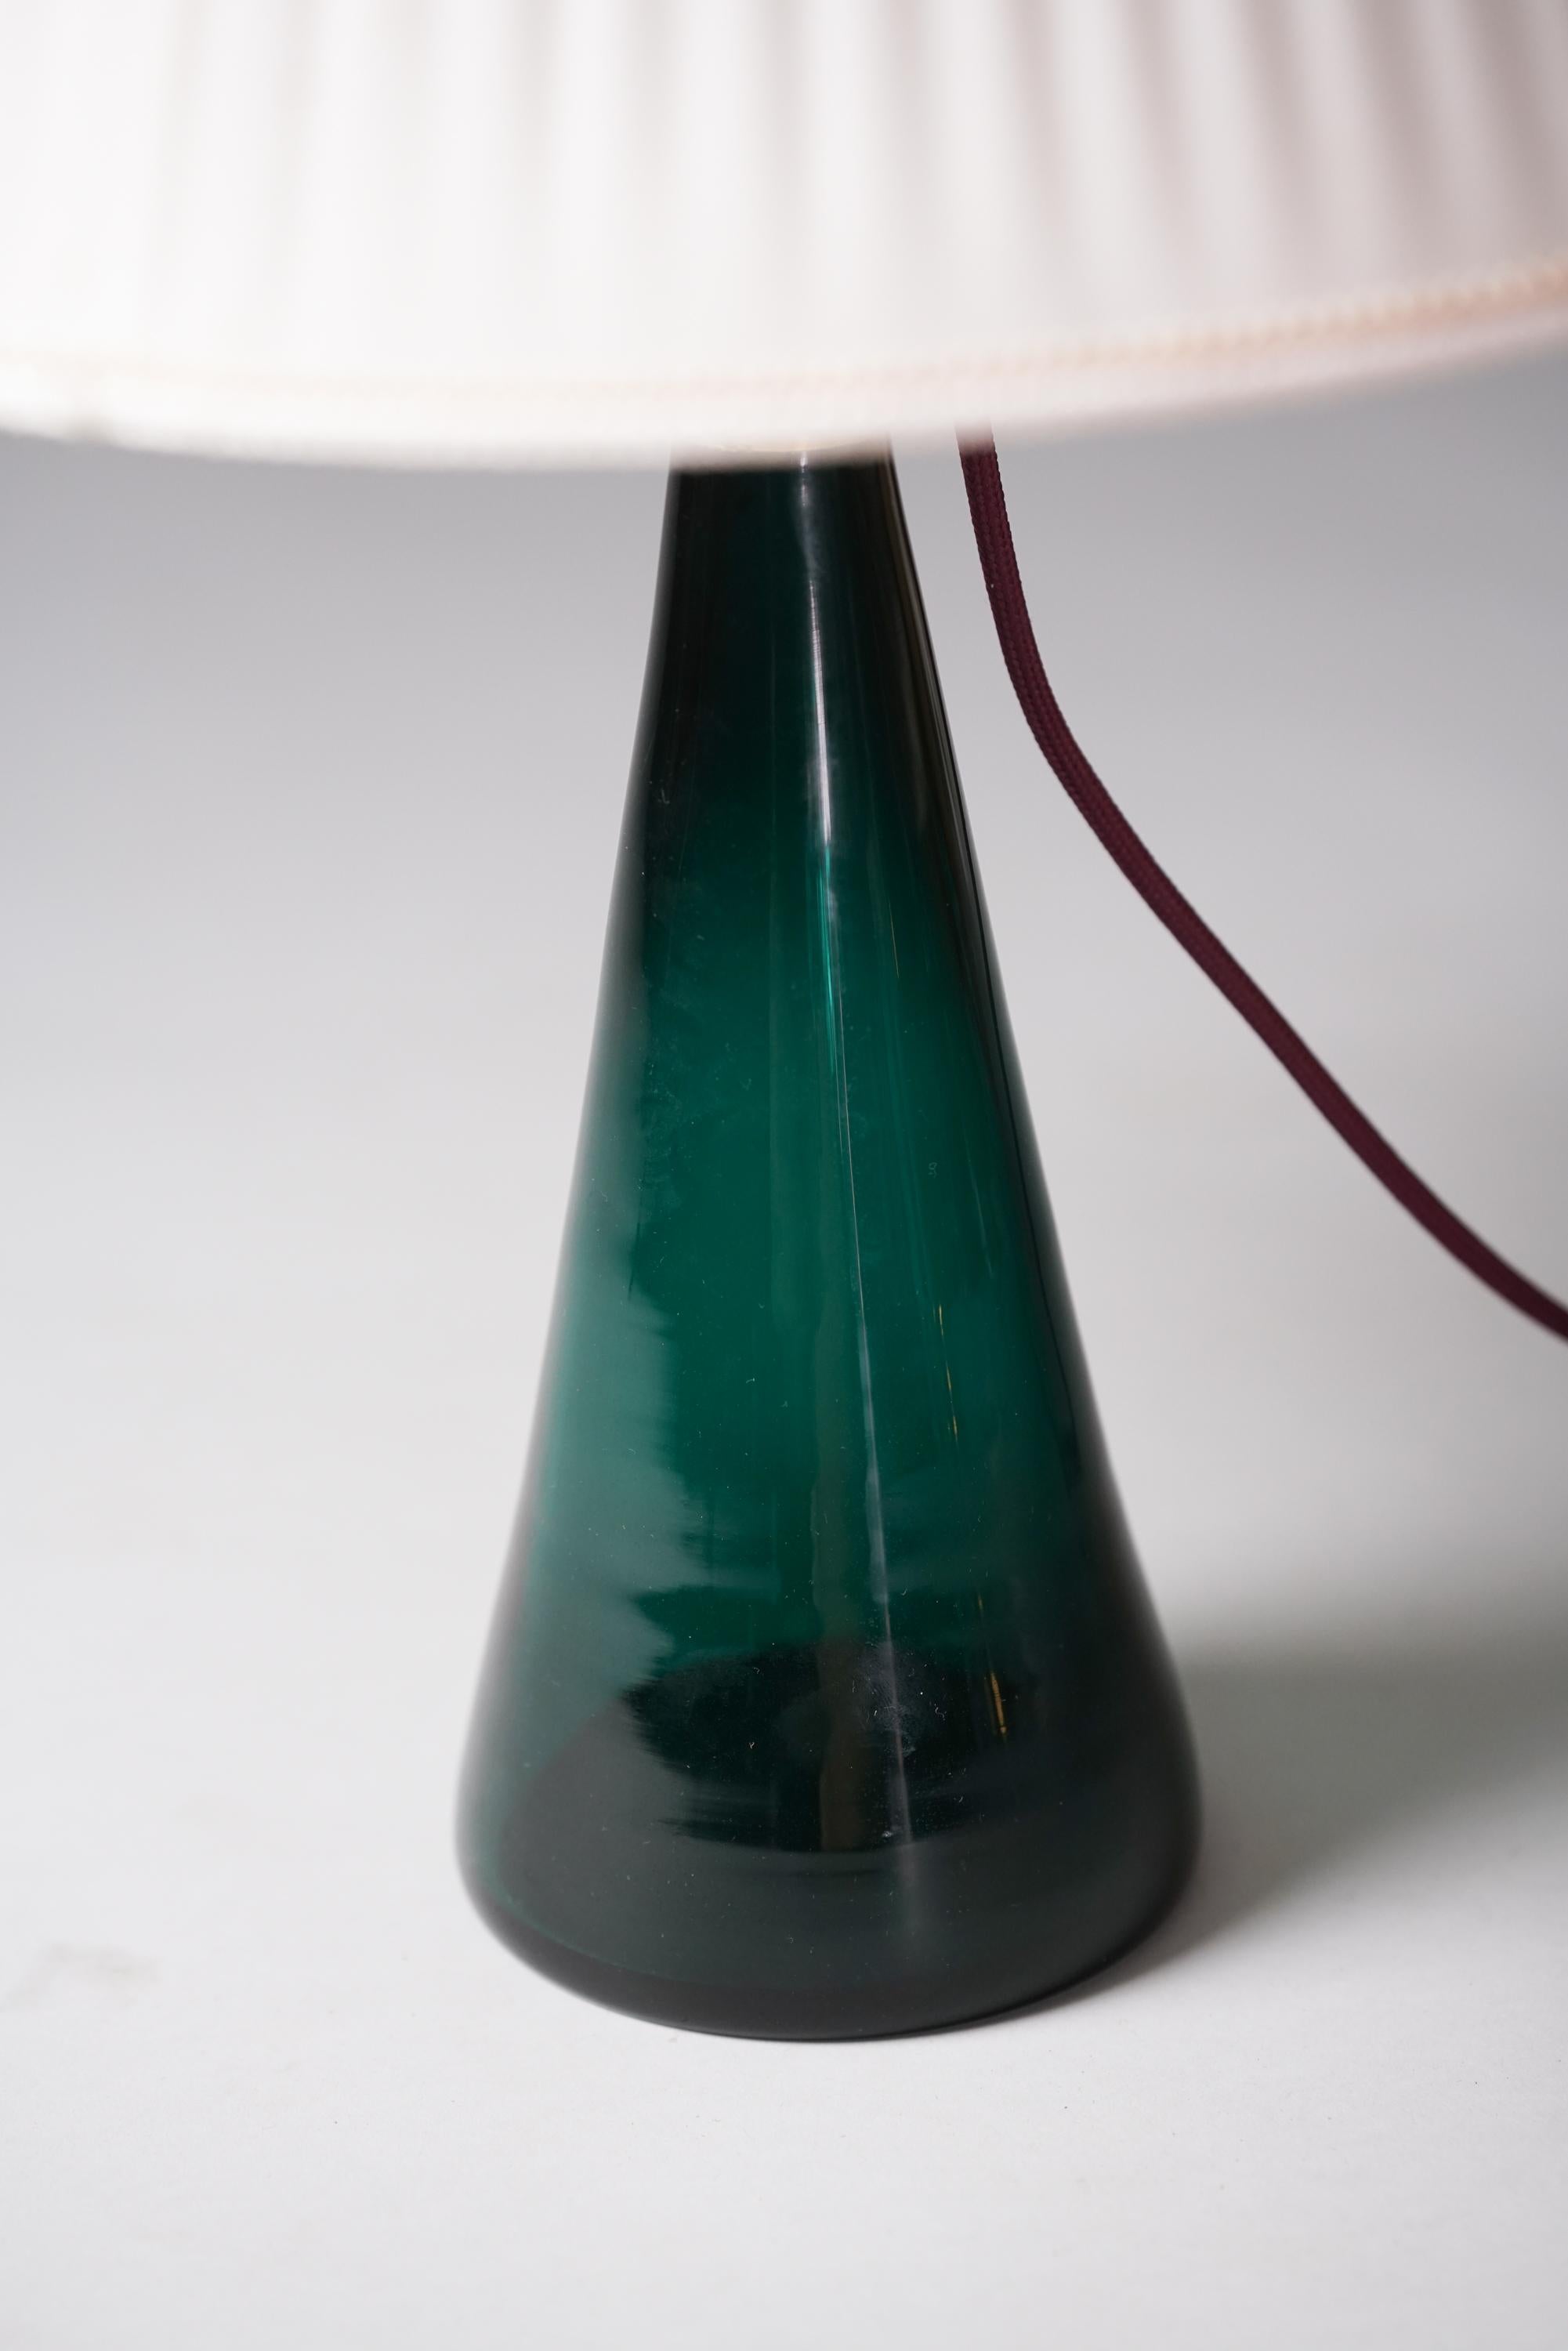 Mid-20th Century Glass Table Lamp, Gunnel Nyman, Idman Oy, 1940/1950s For Sale